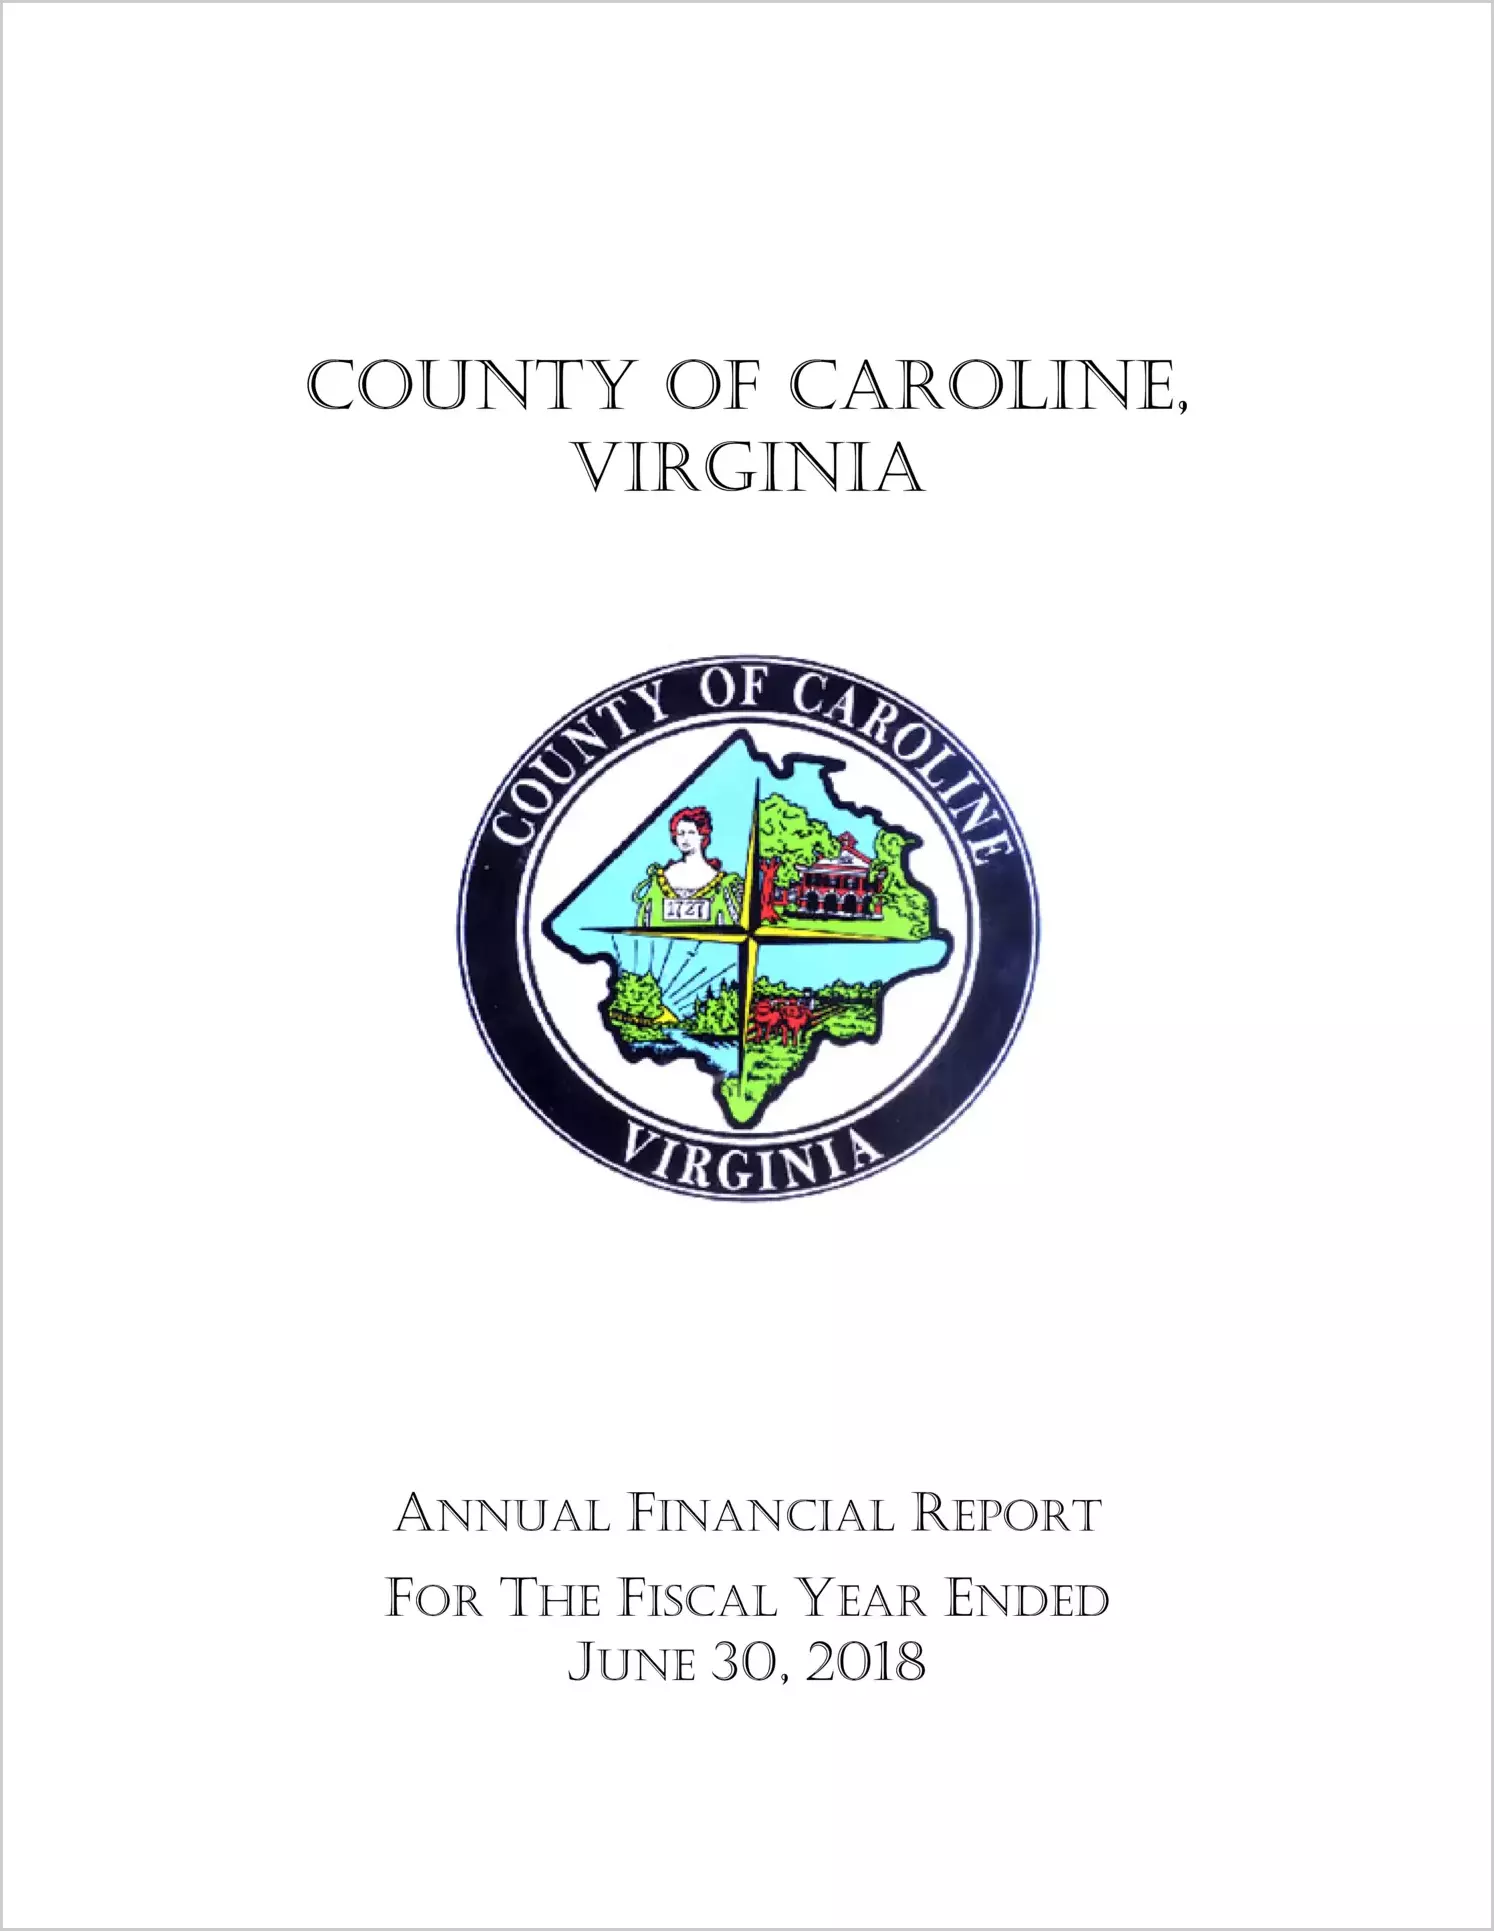 2018 Annual Financial Report for County of Caroline